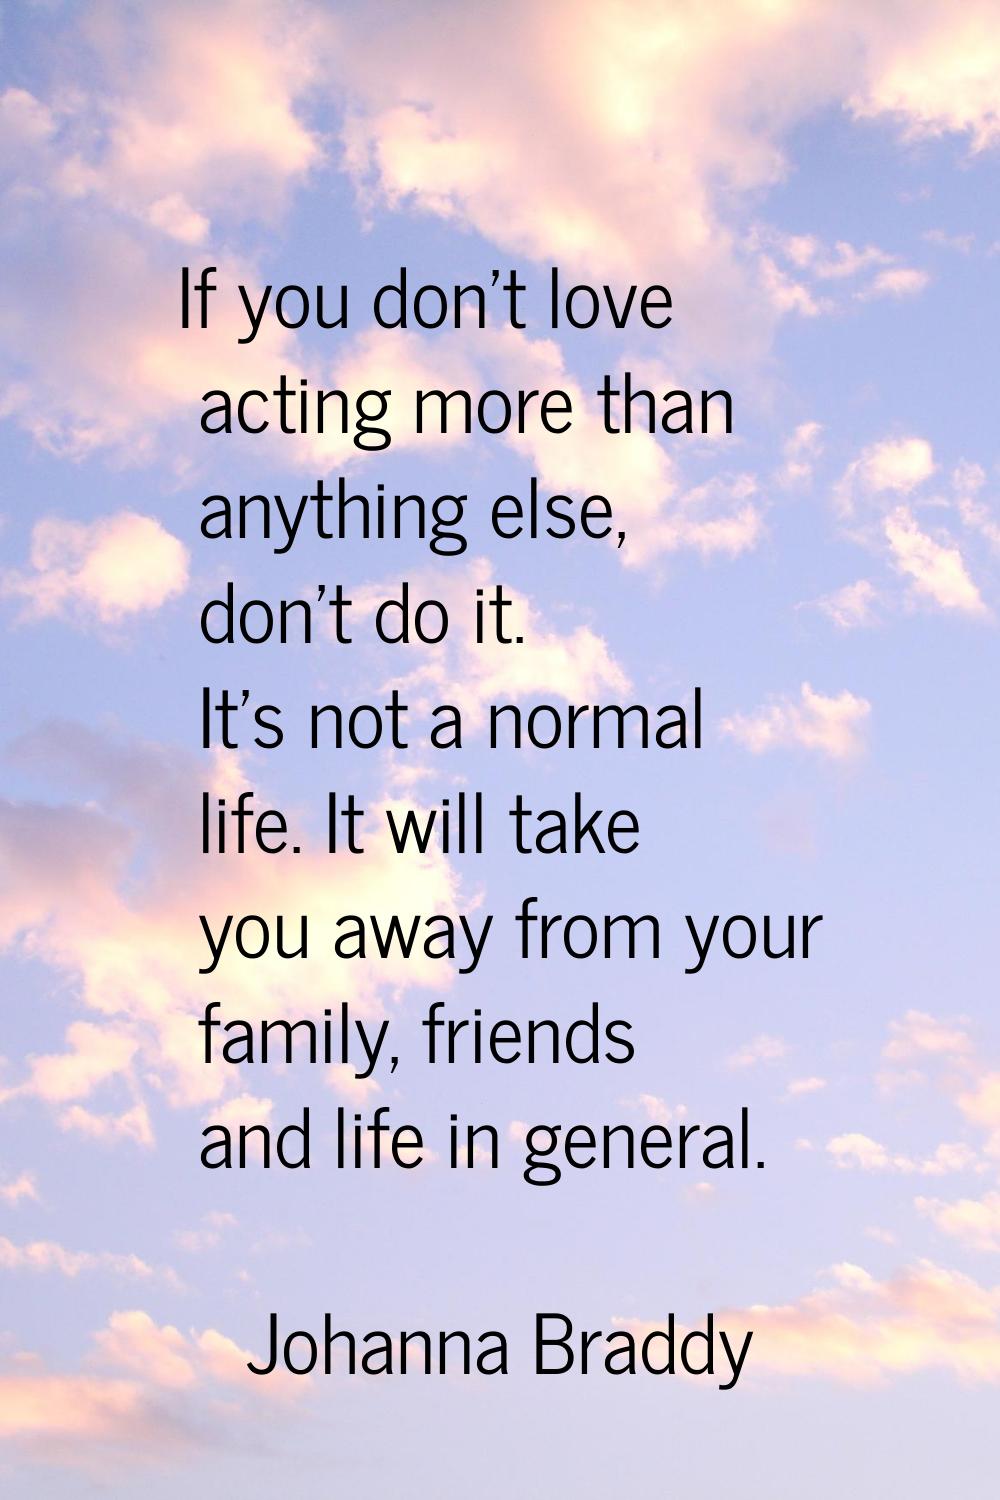 If you don't love acting more than anything else, don't do it. It's not a normal life. It will take